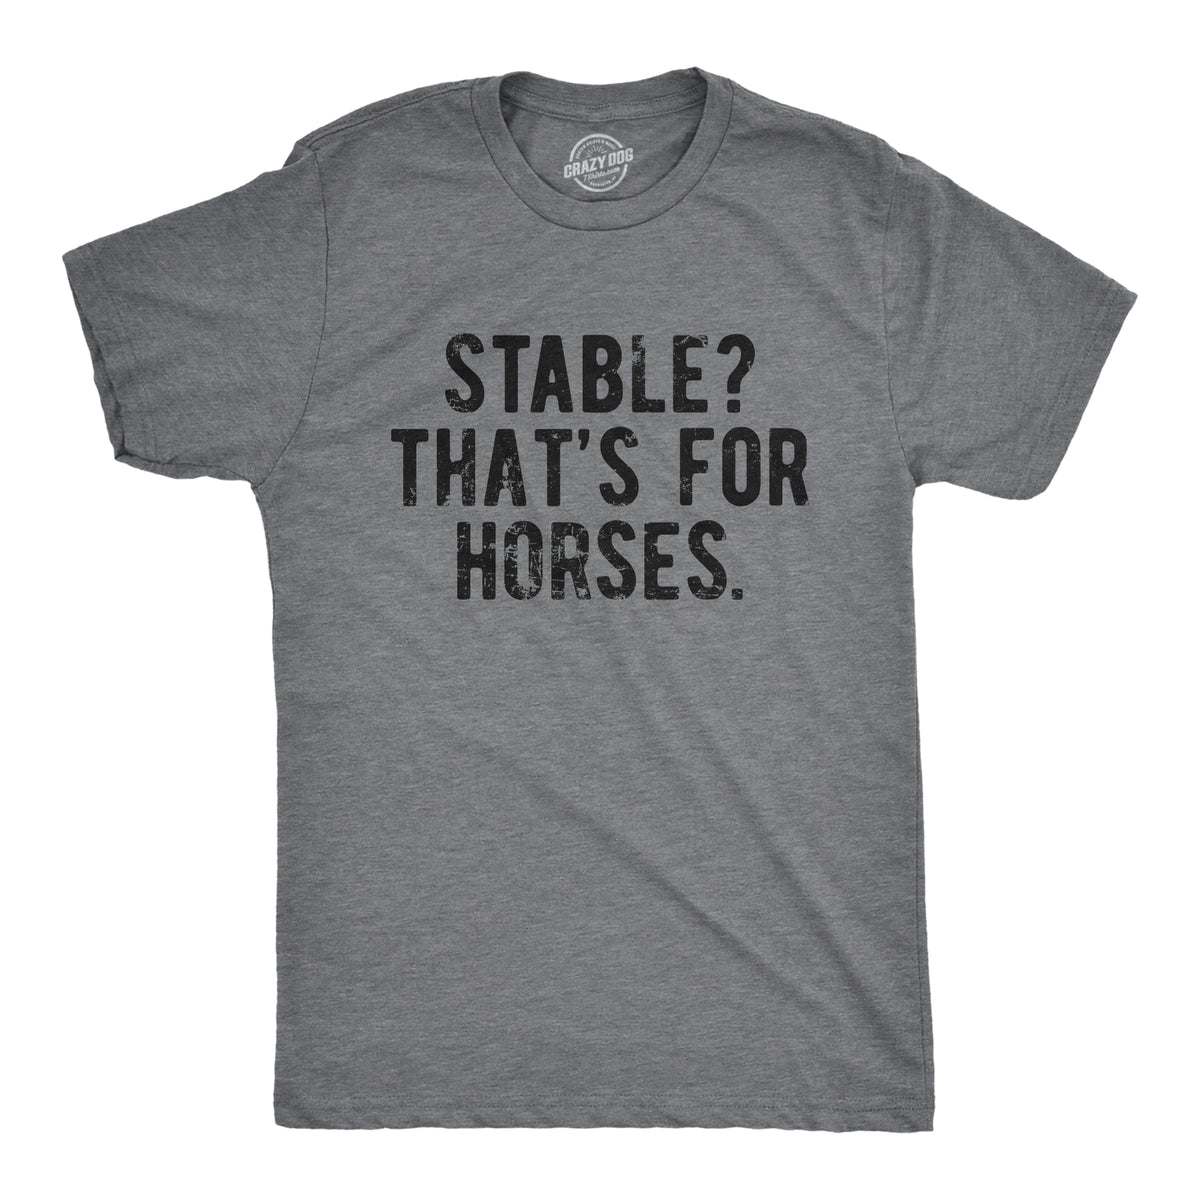 Funny Dark Heather Grey - STABLE Stable Thats For Horses Mens T Shirt Nerdy sarcastic Tee